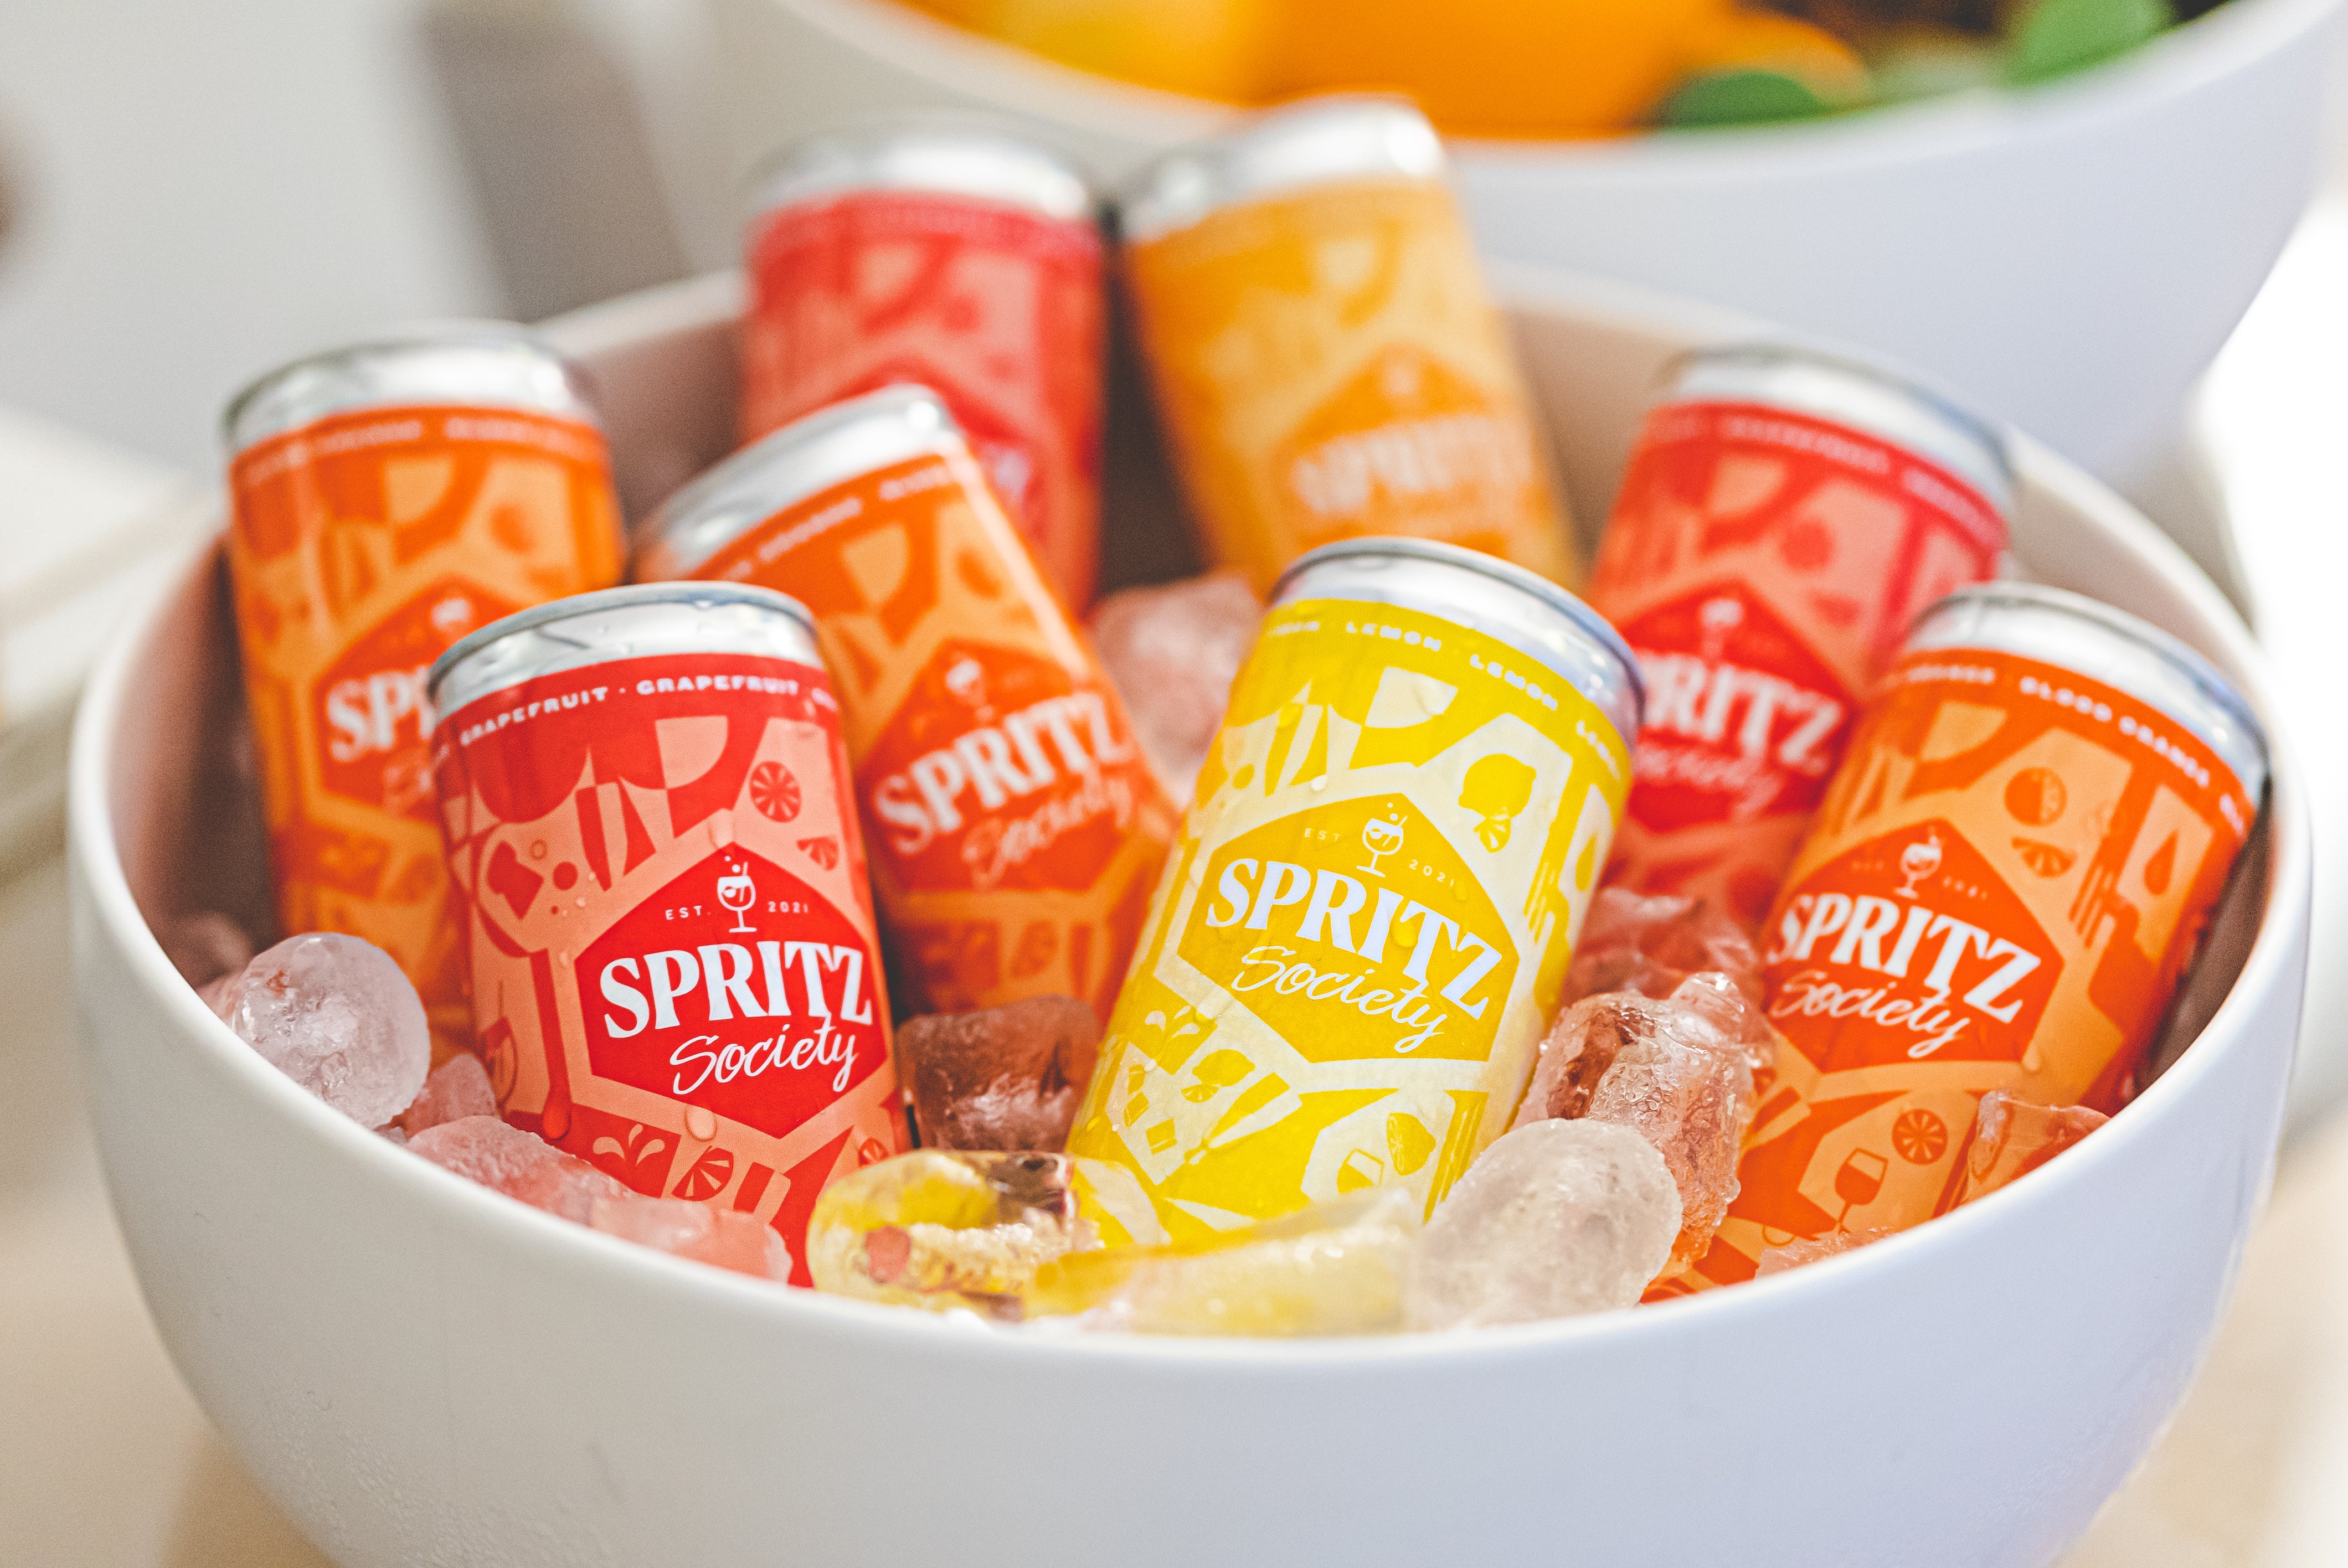 Haven't tried Spritz yet? Well, what are you waiting for! We are hosting tastings at Total Wines in California and Florida throughout April and May...